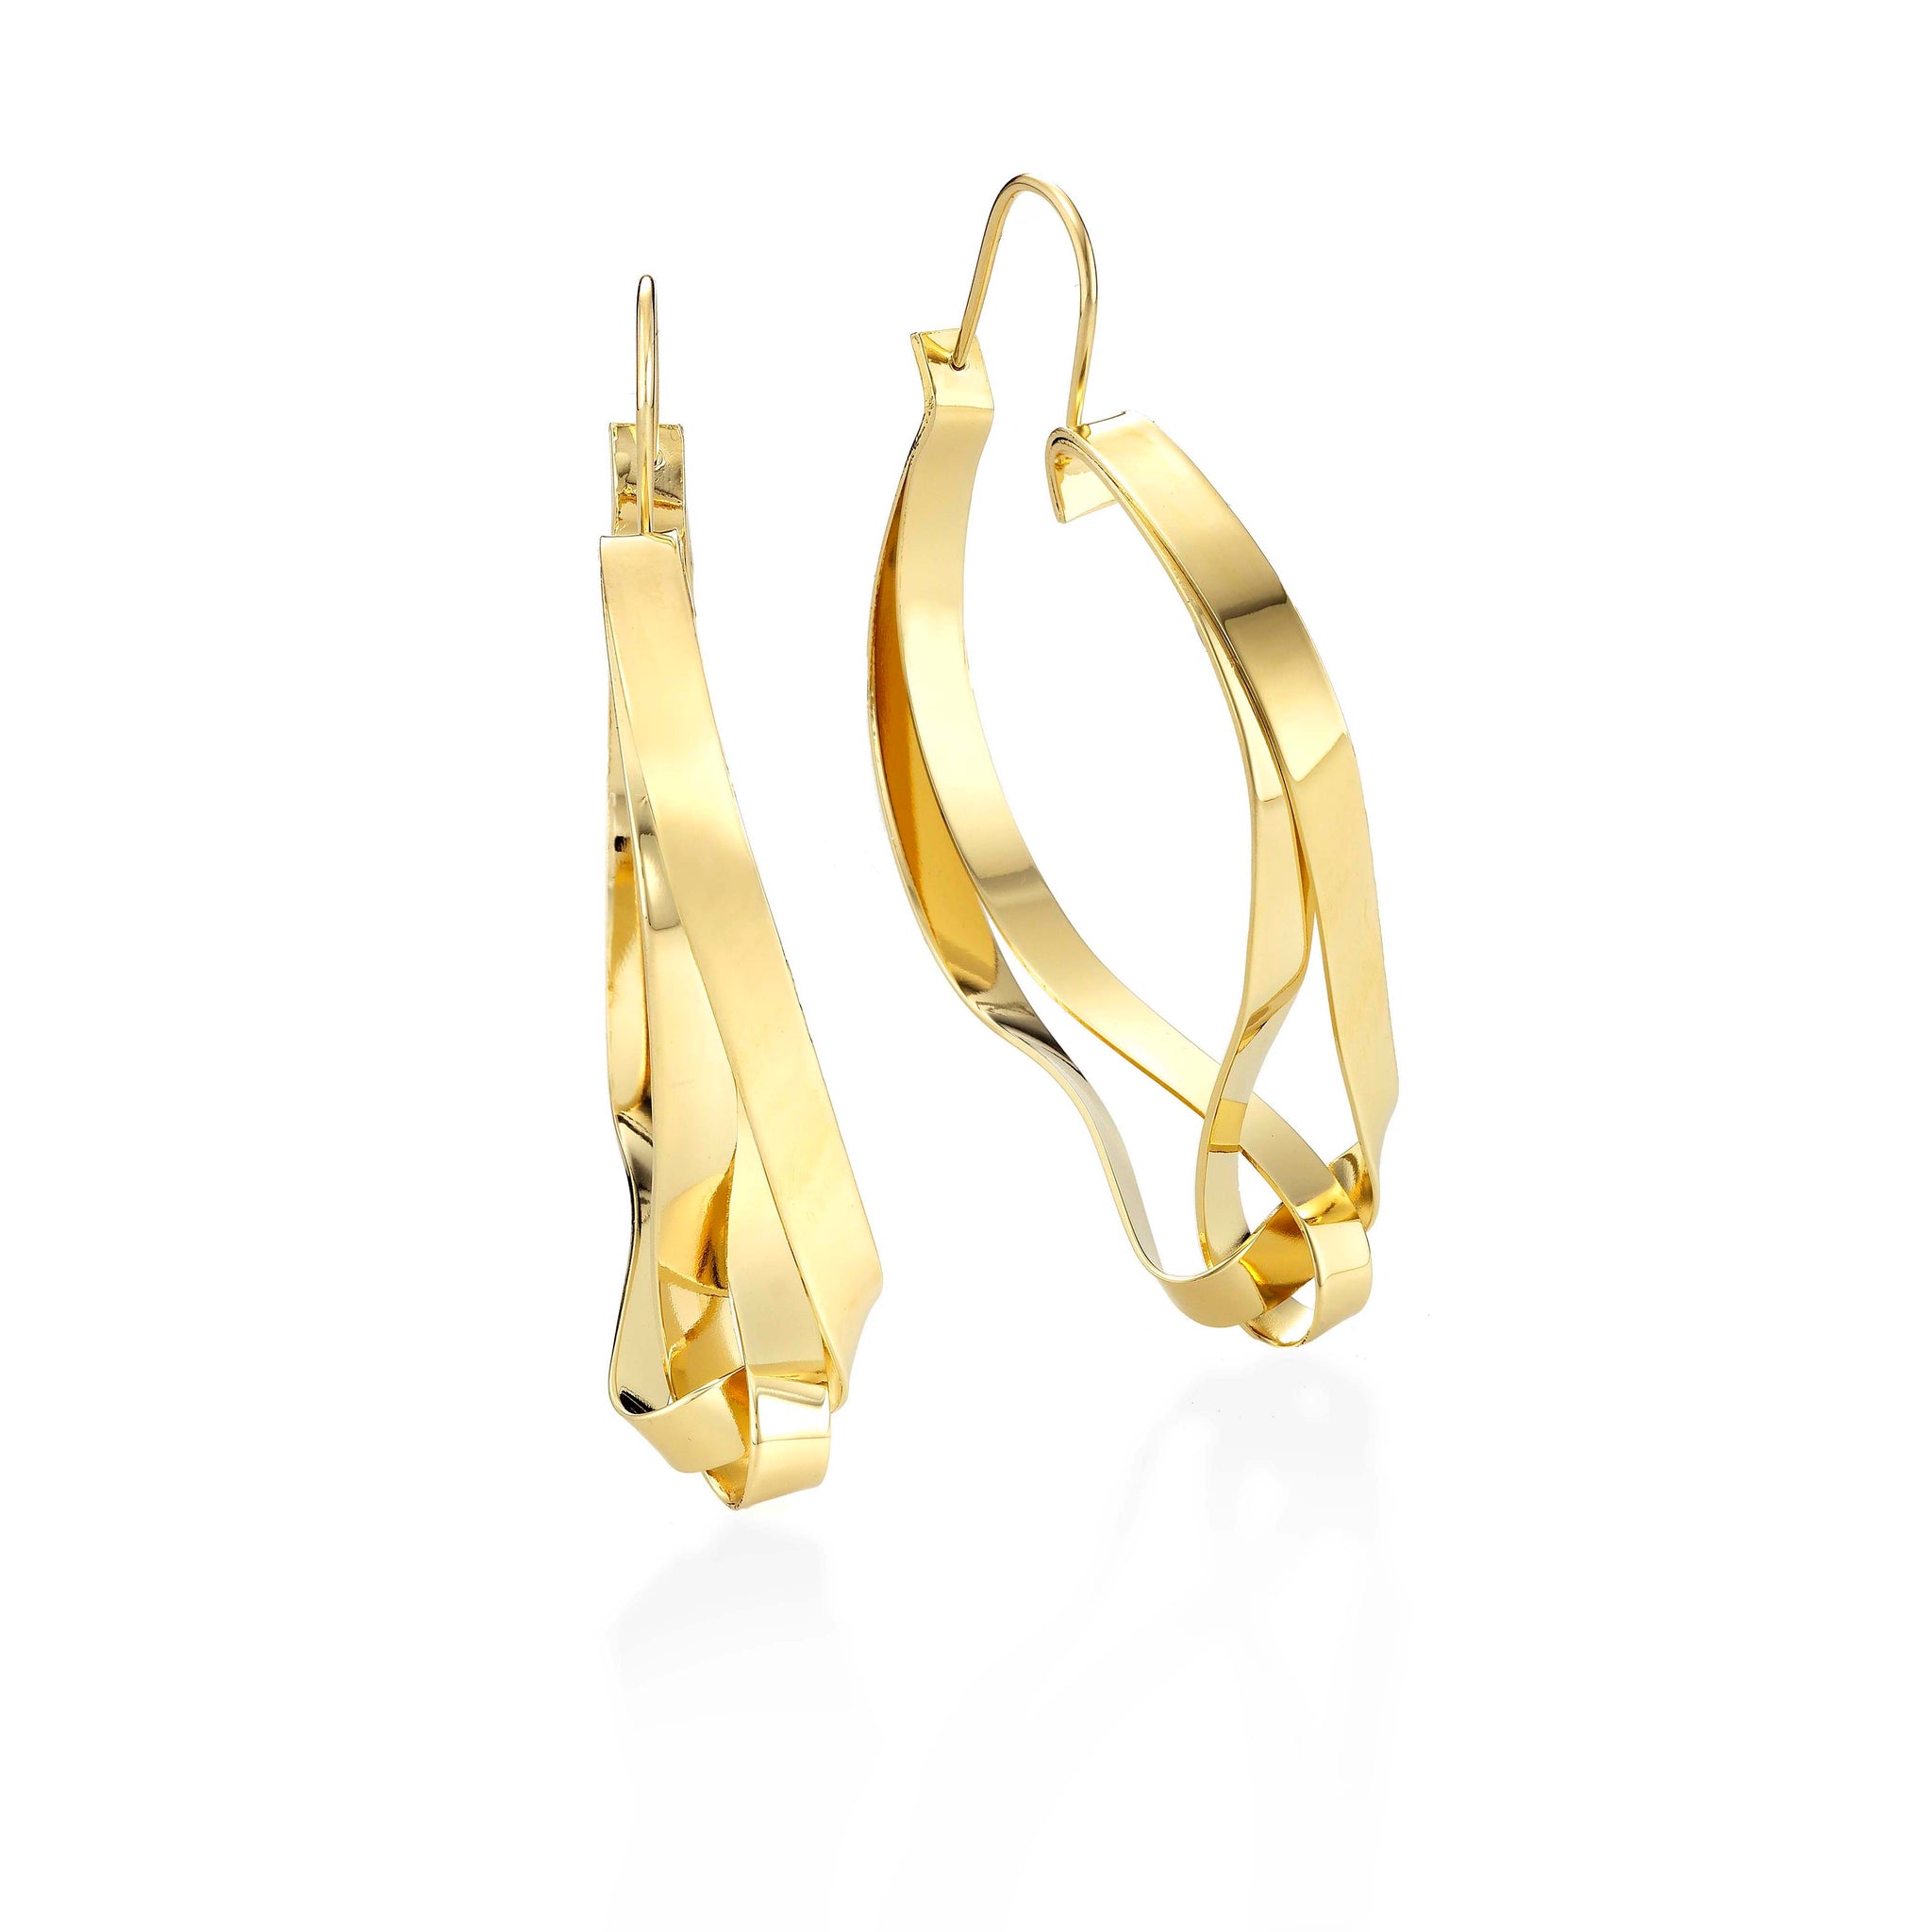 Oblik Atelier twisted ribbon hoop earring. Earring is hand formed in brass and finished in 14k nickel free plating. Formed out of fine metal ribbons so it's dramatic in size 2.5" by 1" but light to wear. Secure wire to the back.